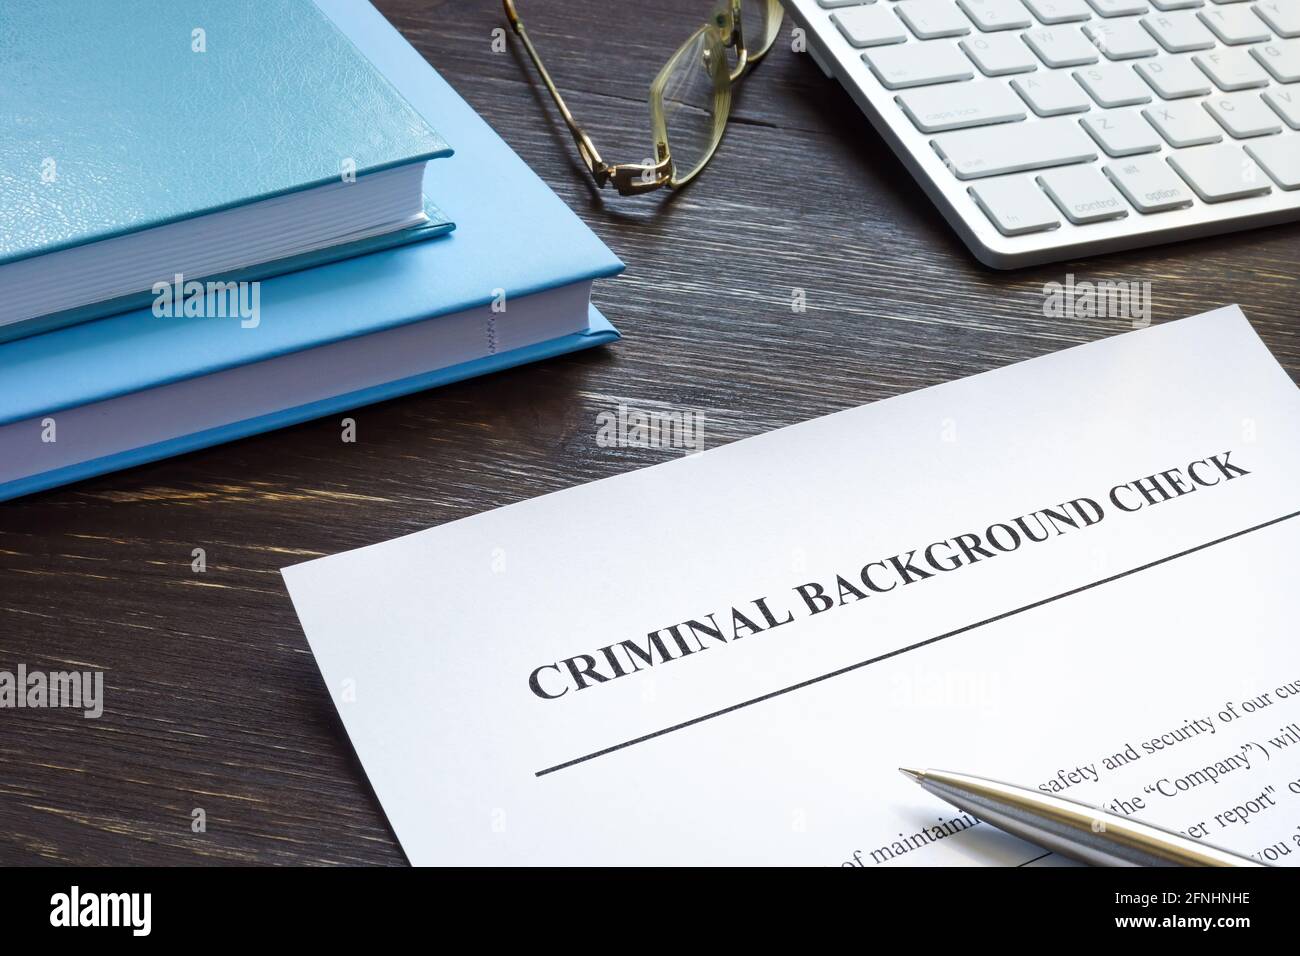 Criminal background check request form with pen. Stock Photo